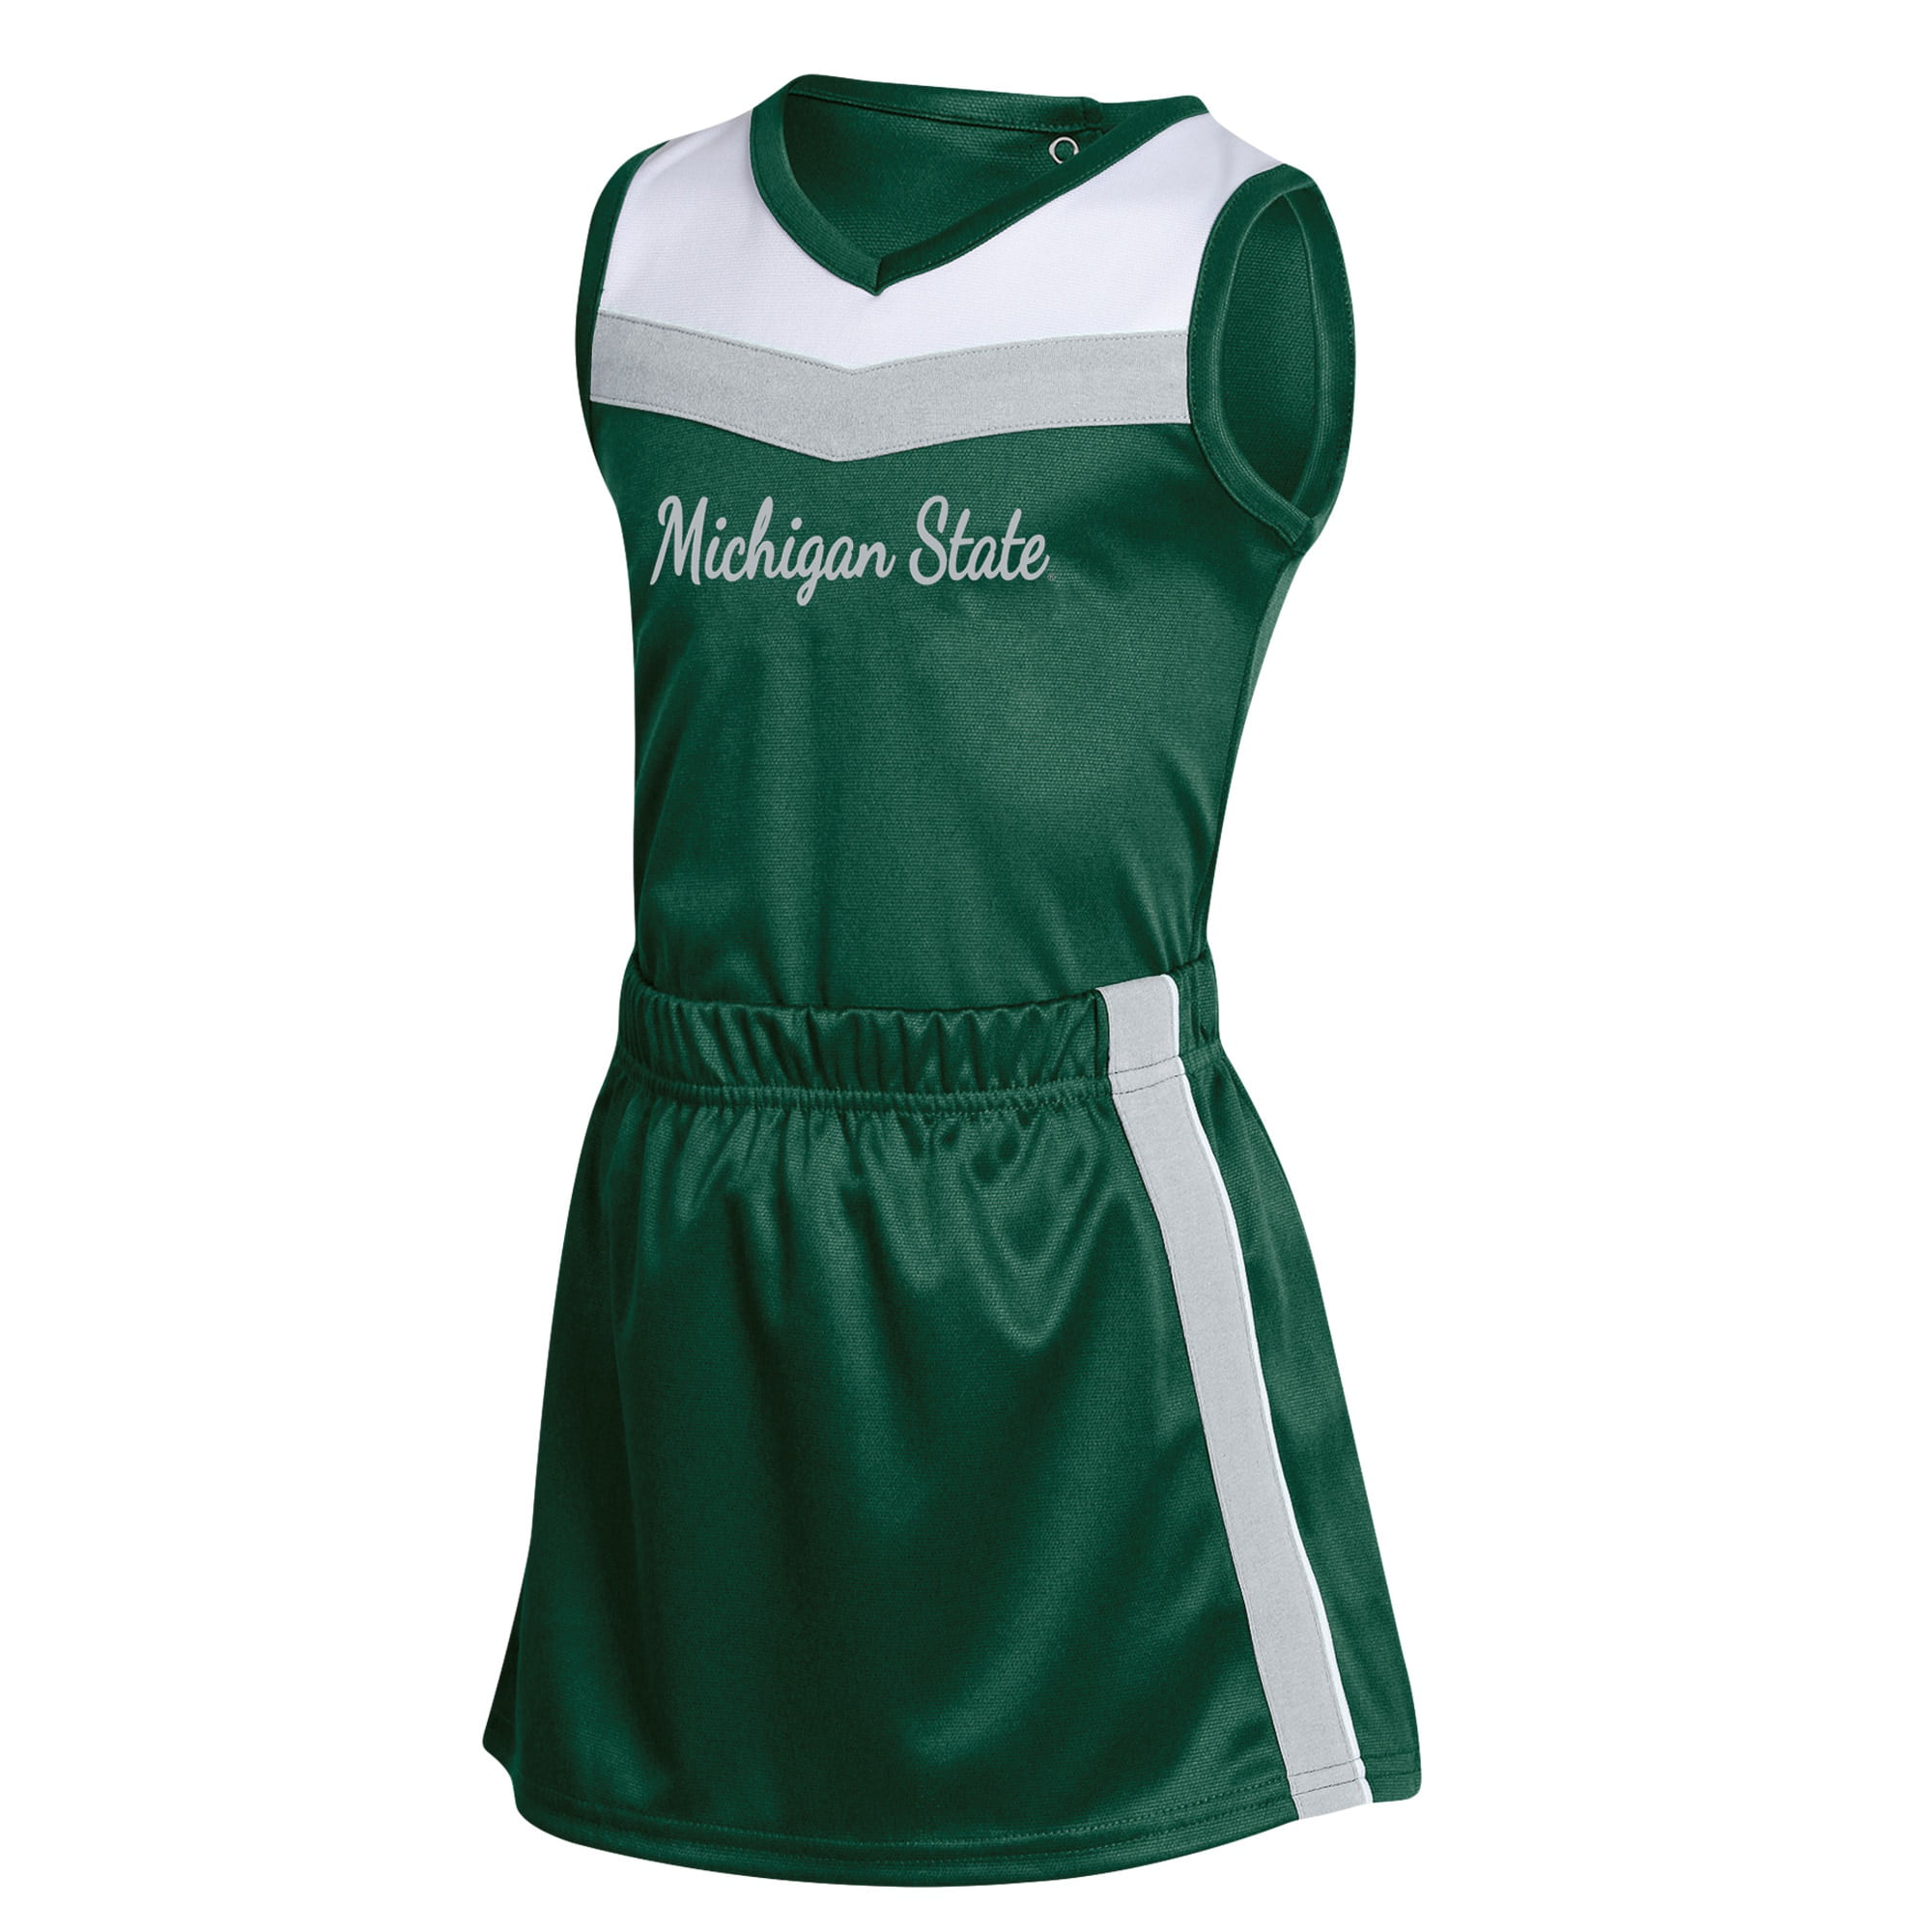 Michigan State Girl Toddler Dress with Flowers